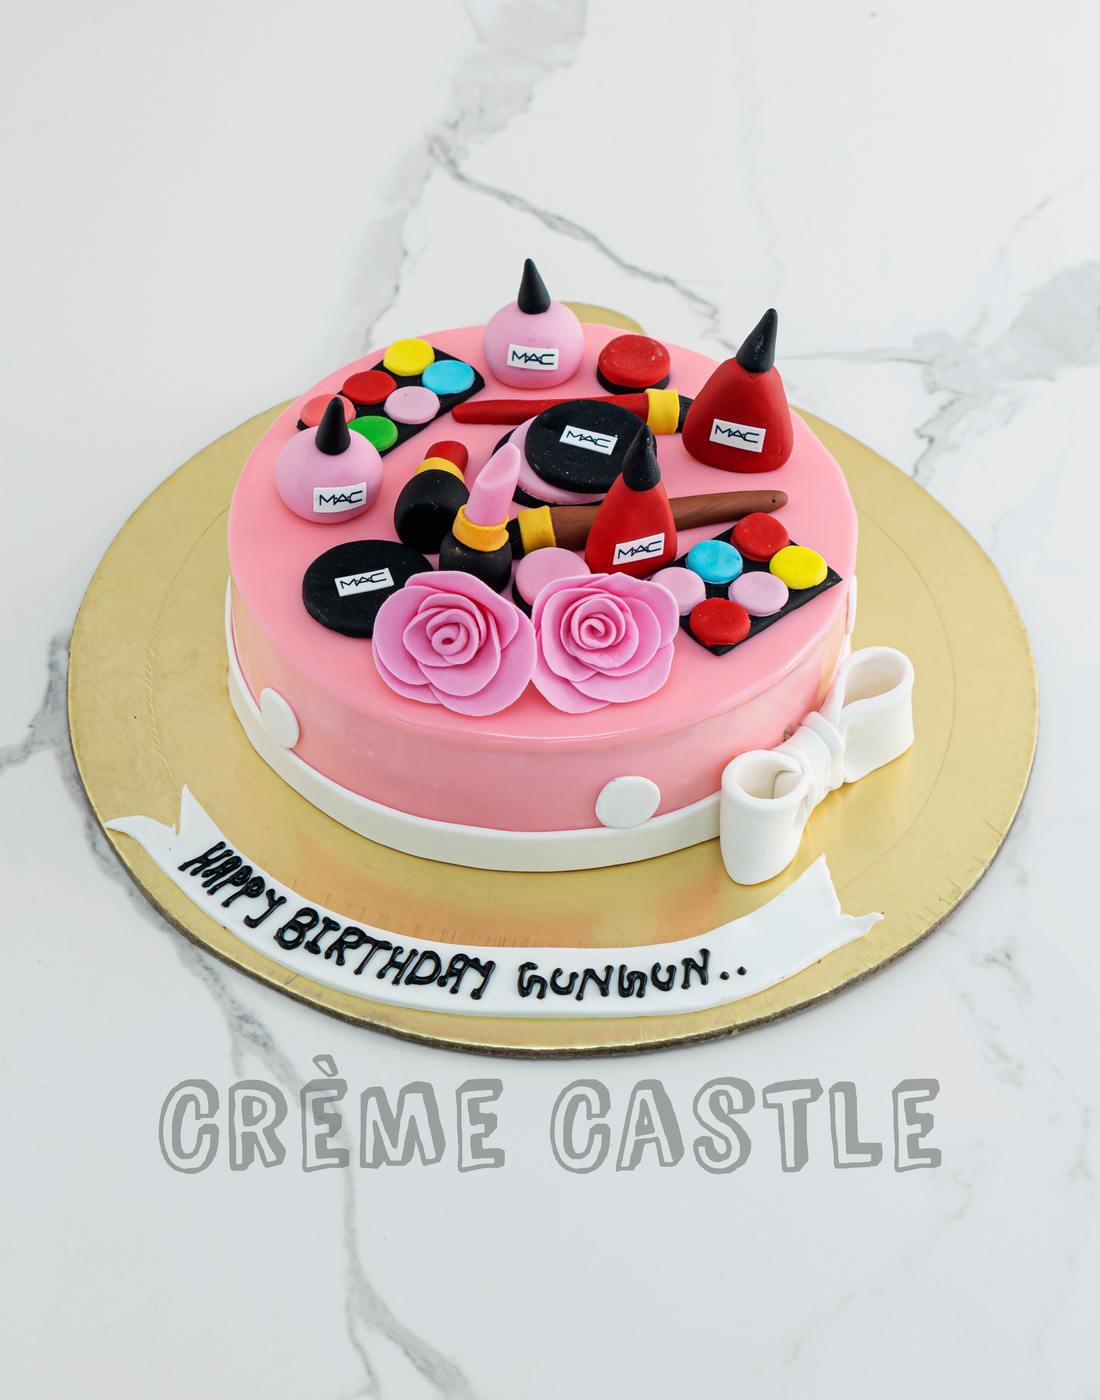 Share 147+ customized cake for girlfriend best